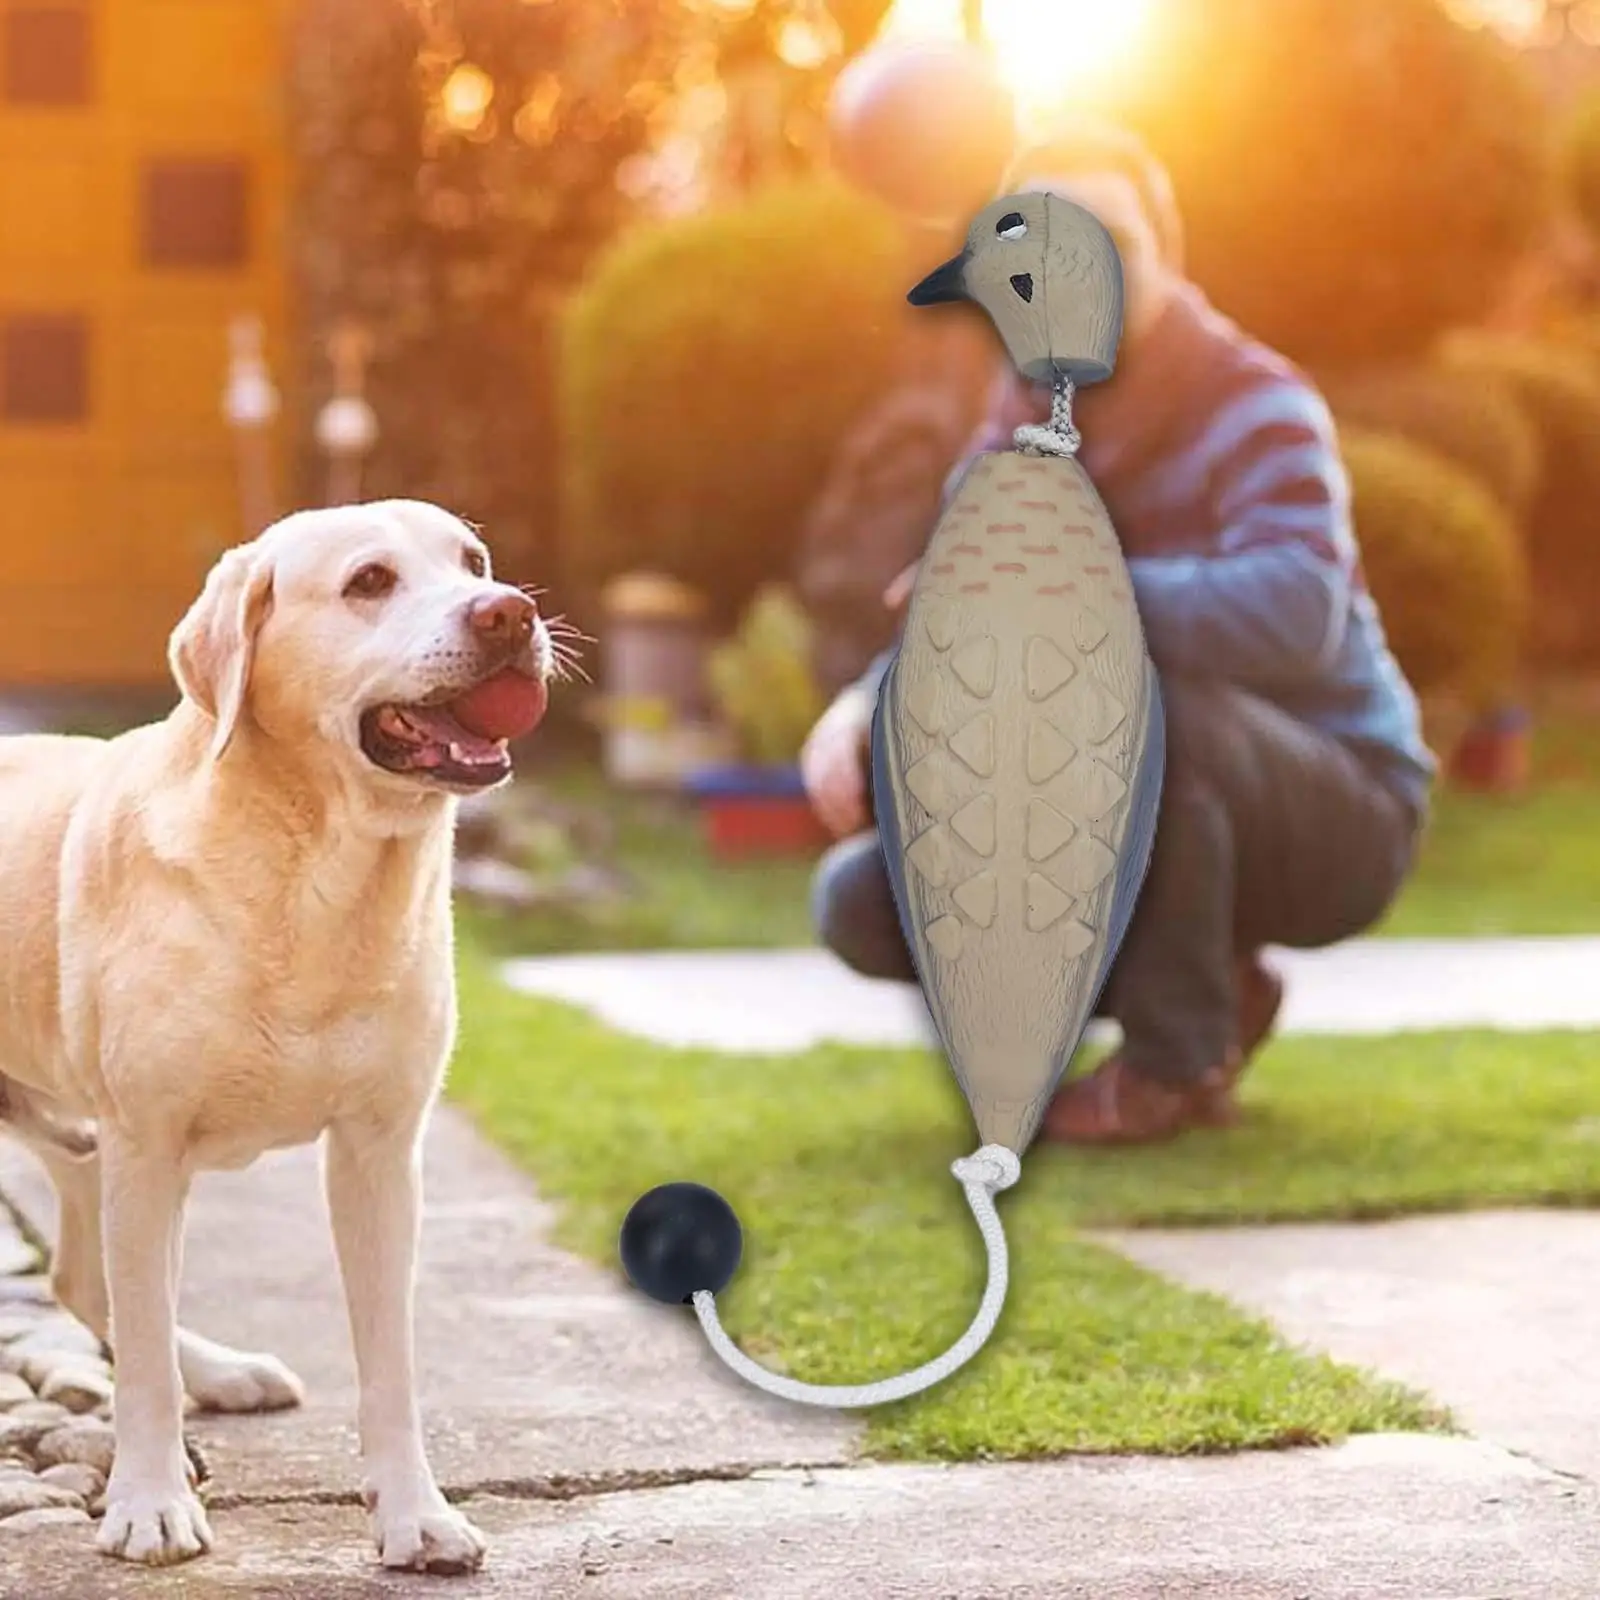 Hunting Decoy Fake Birds Dog Toy for Dog Training Durable Realistic Dove Decoy Ornament for Yard Lake Pond Decor